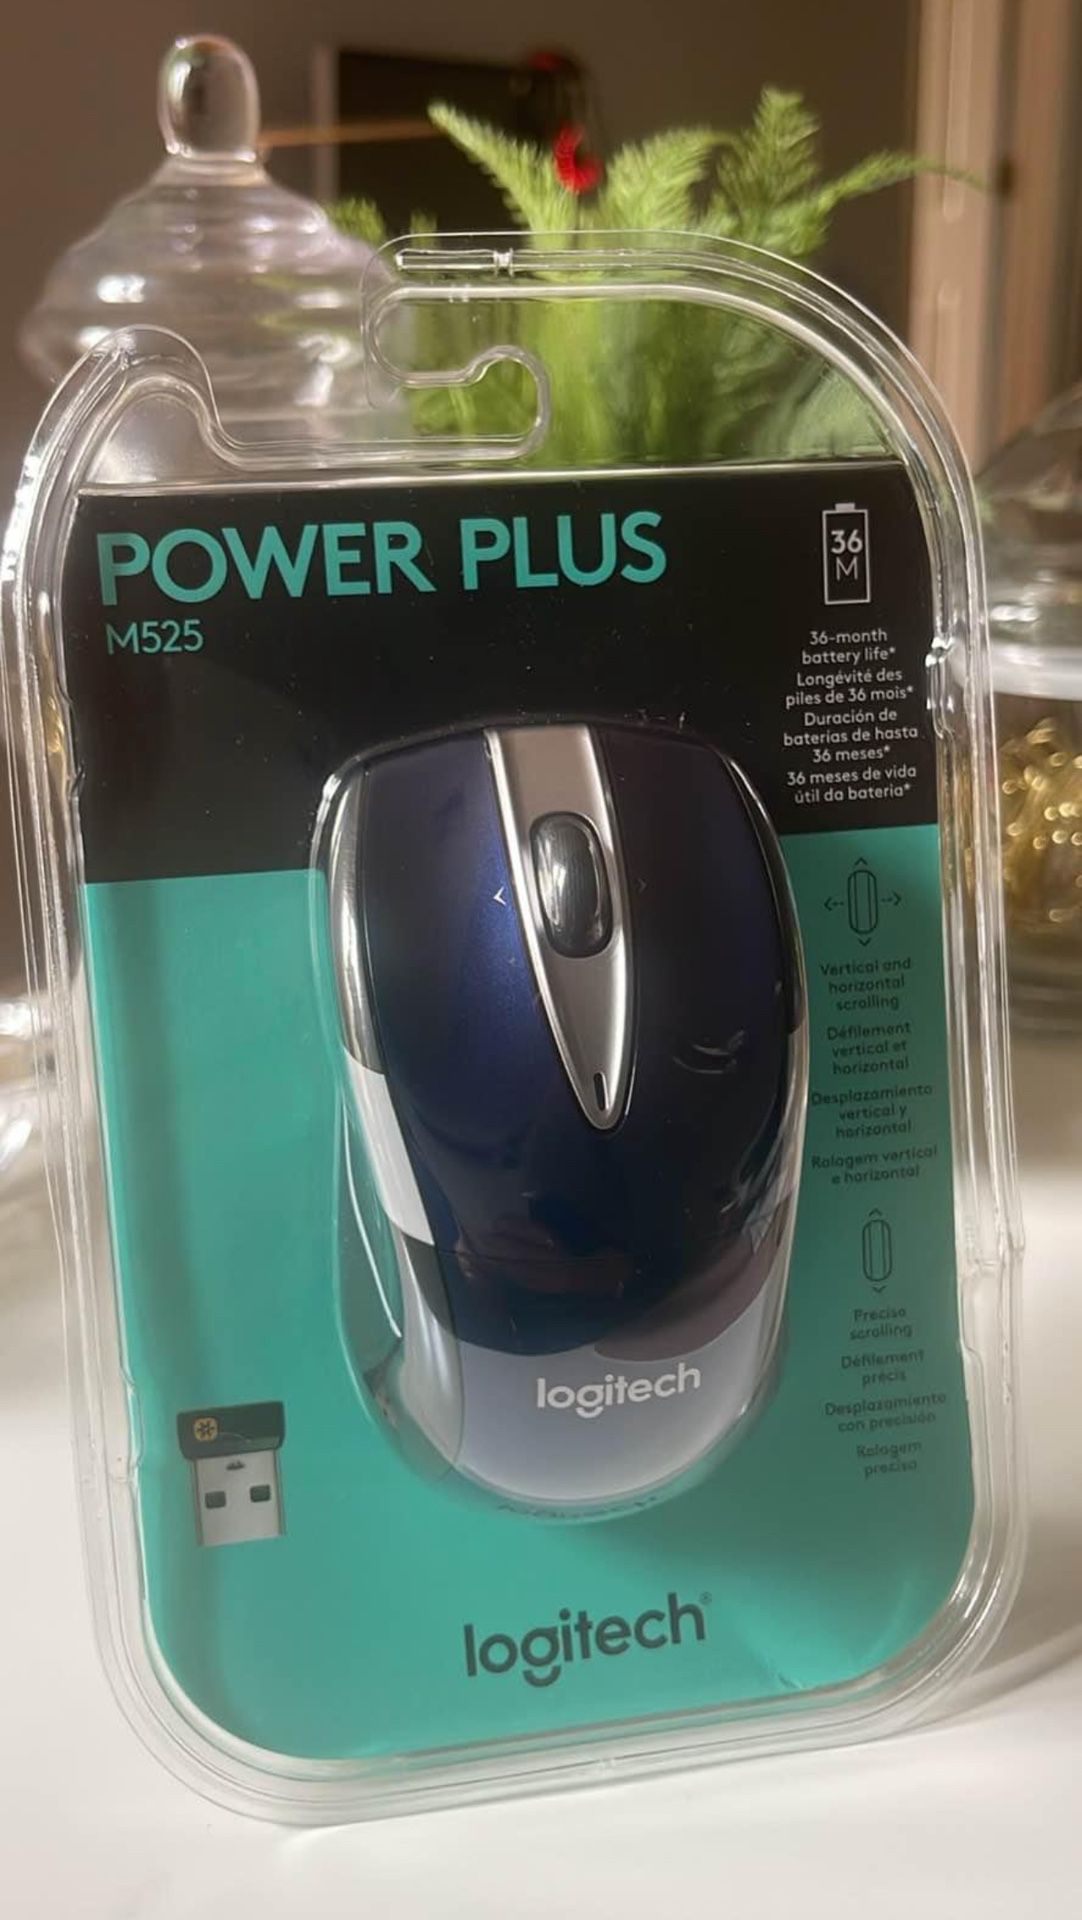 NEW bluetooth logitech mouse (3 years battery life)